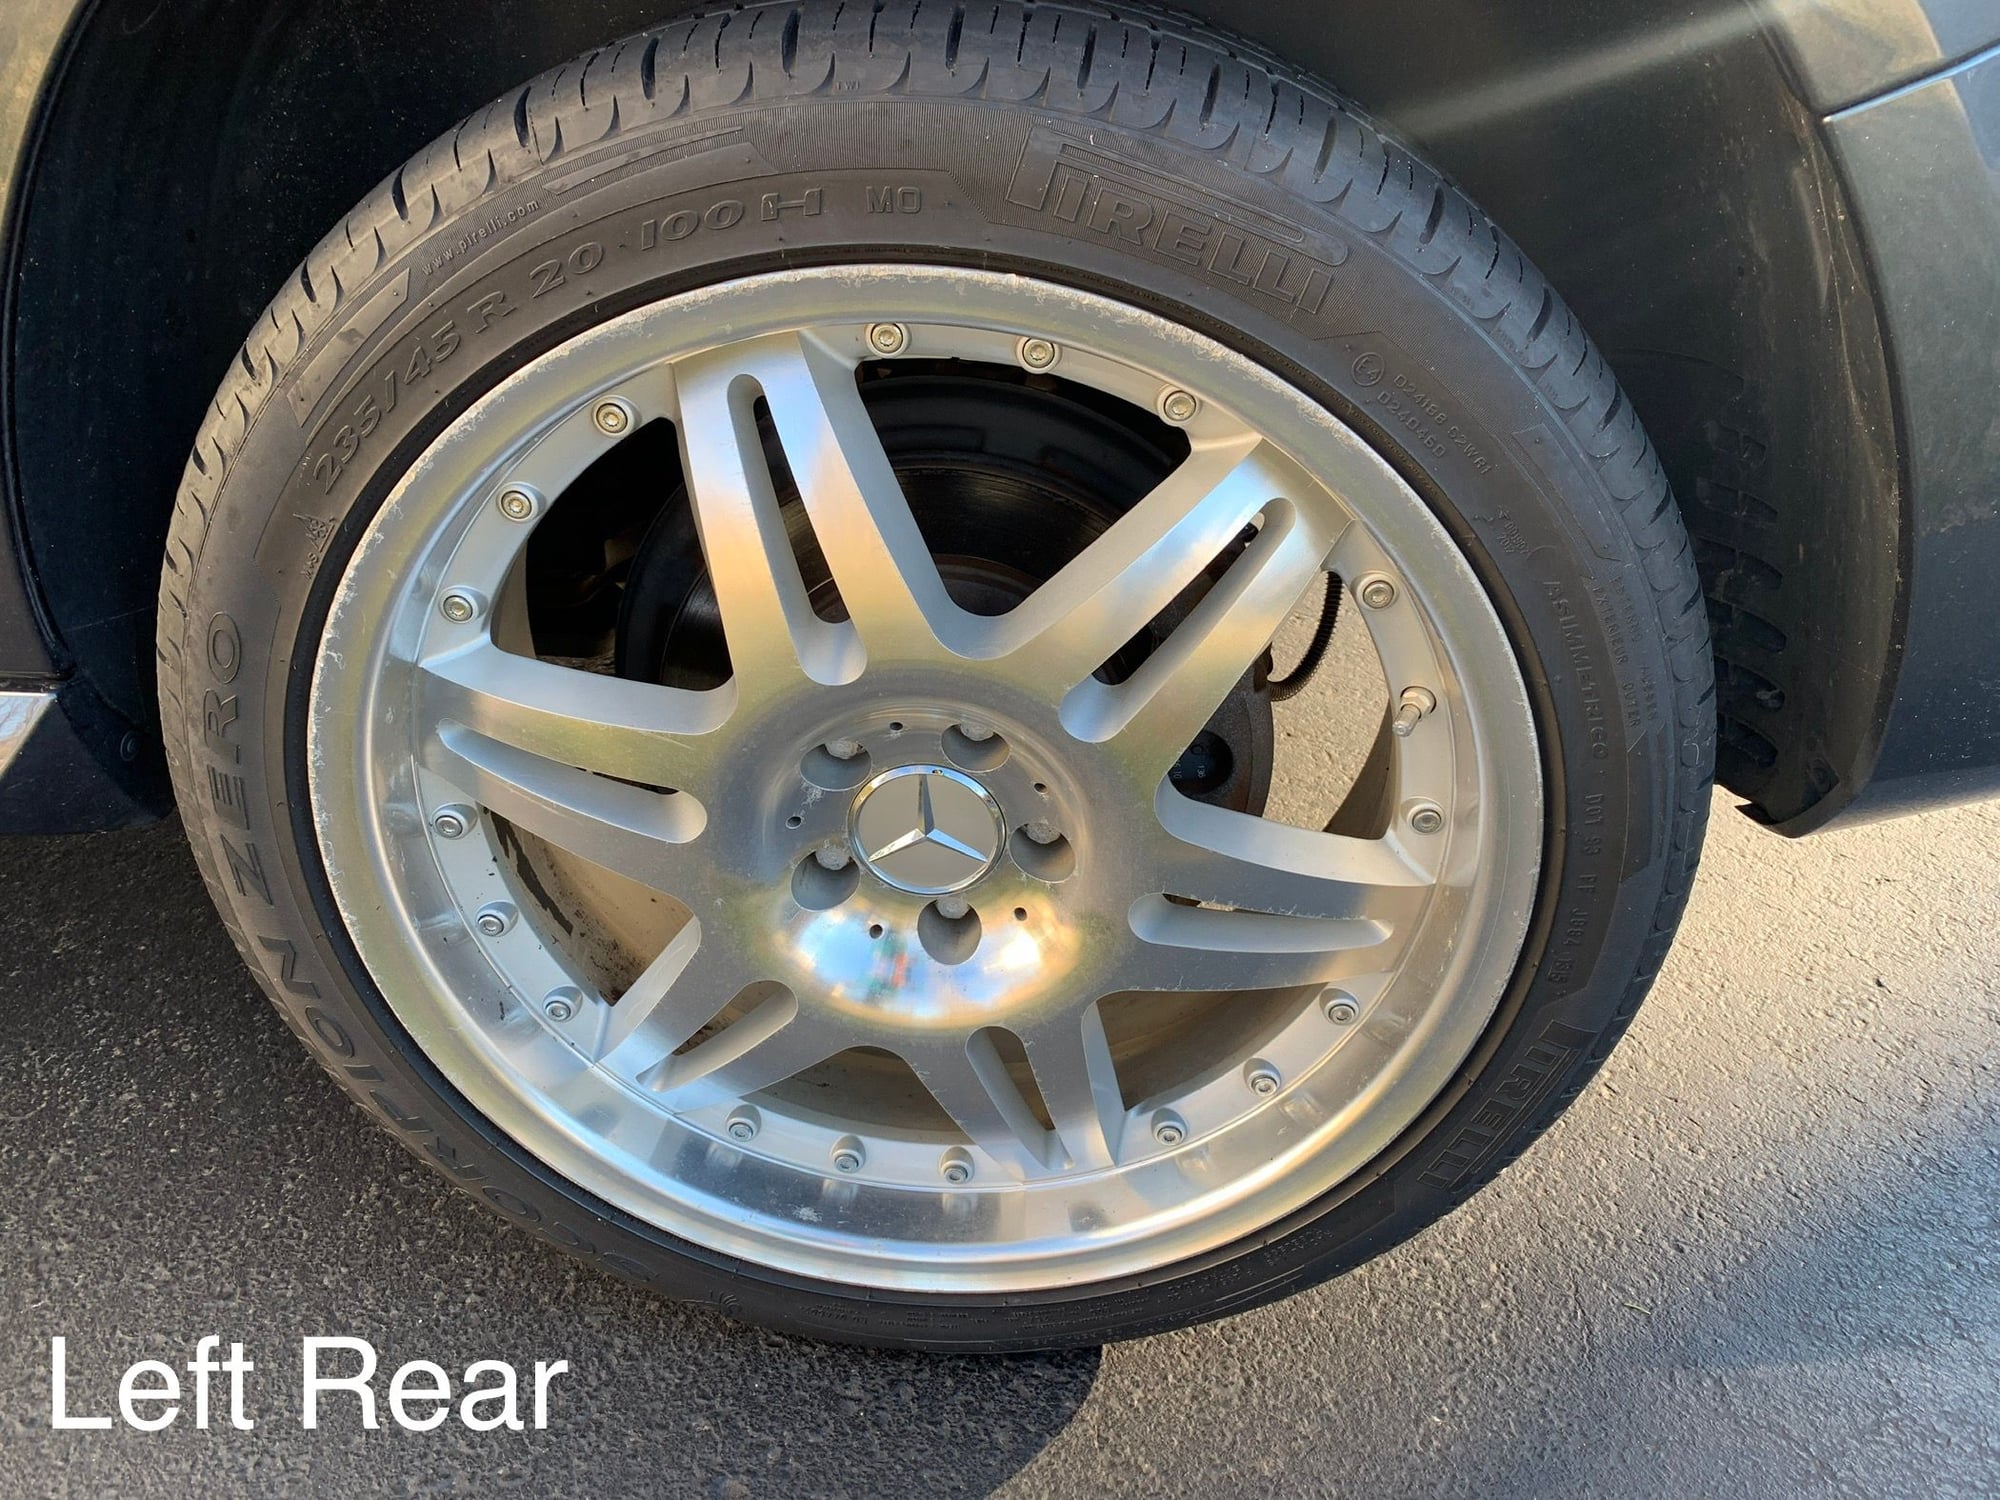 Wheels and Tires/Axles - Mercedes GLK350 4matic 20" Sport Wheels and tires - Used - 2010 Mercedes-Benz GLK350 - Kendall Park, NJ 08824, United States